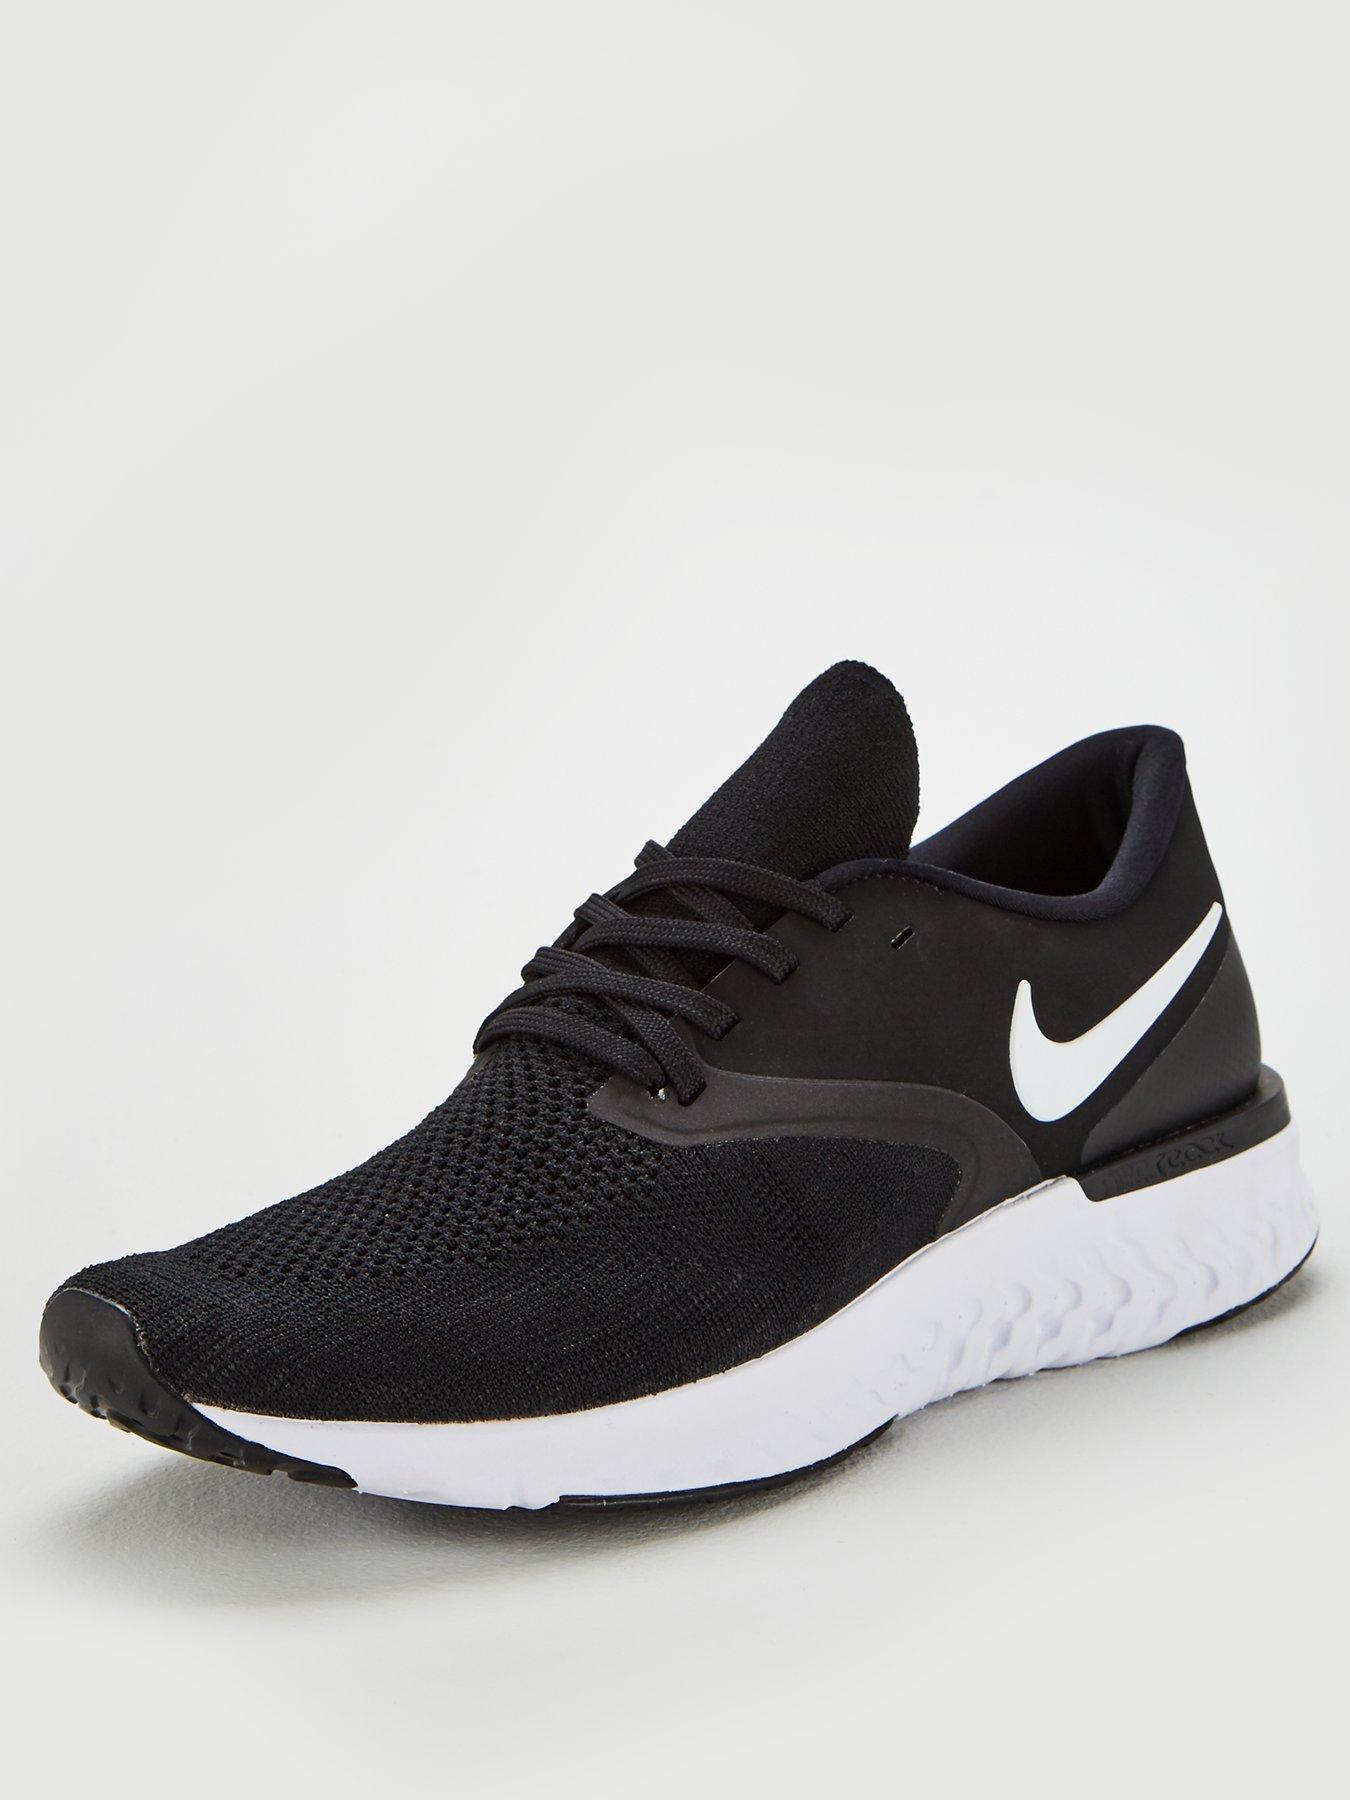 nike odyssey react flyknit 2 black and white